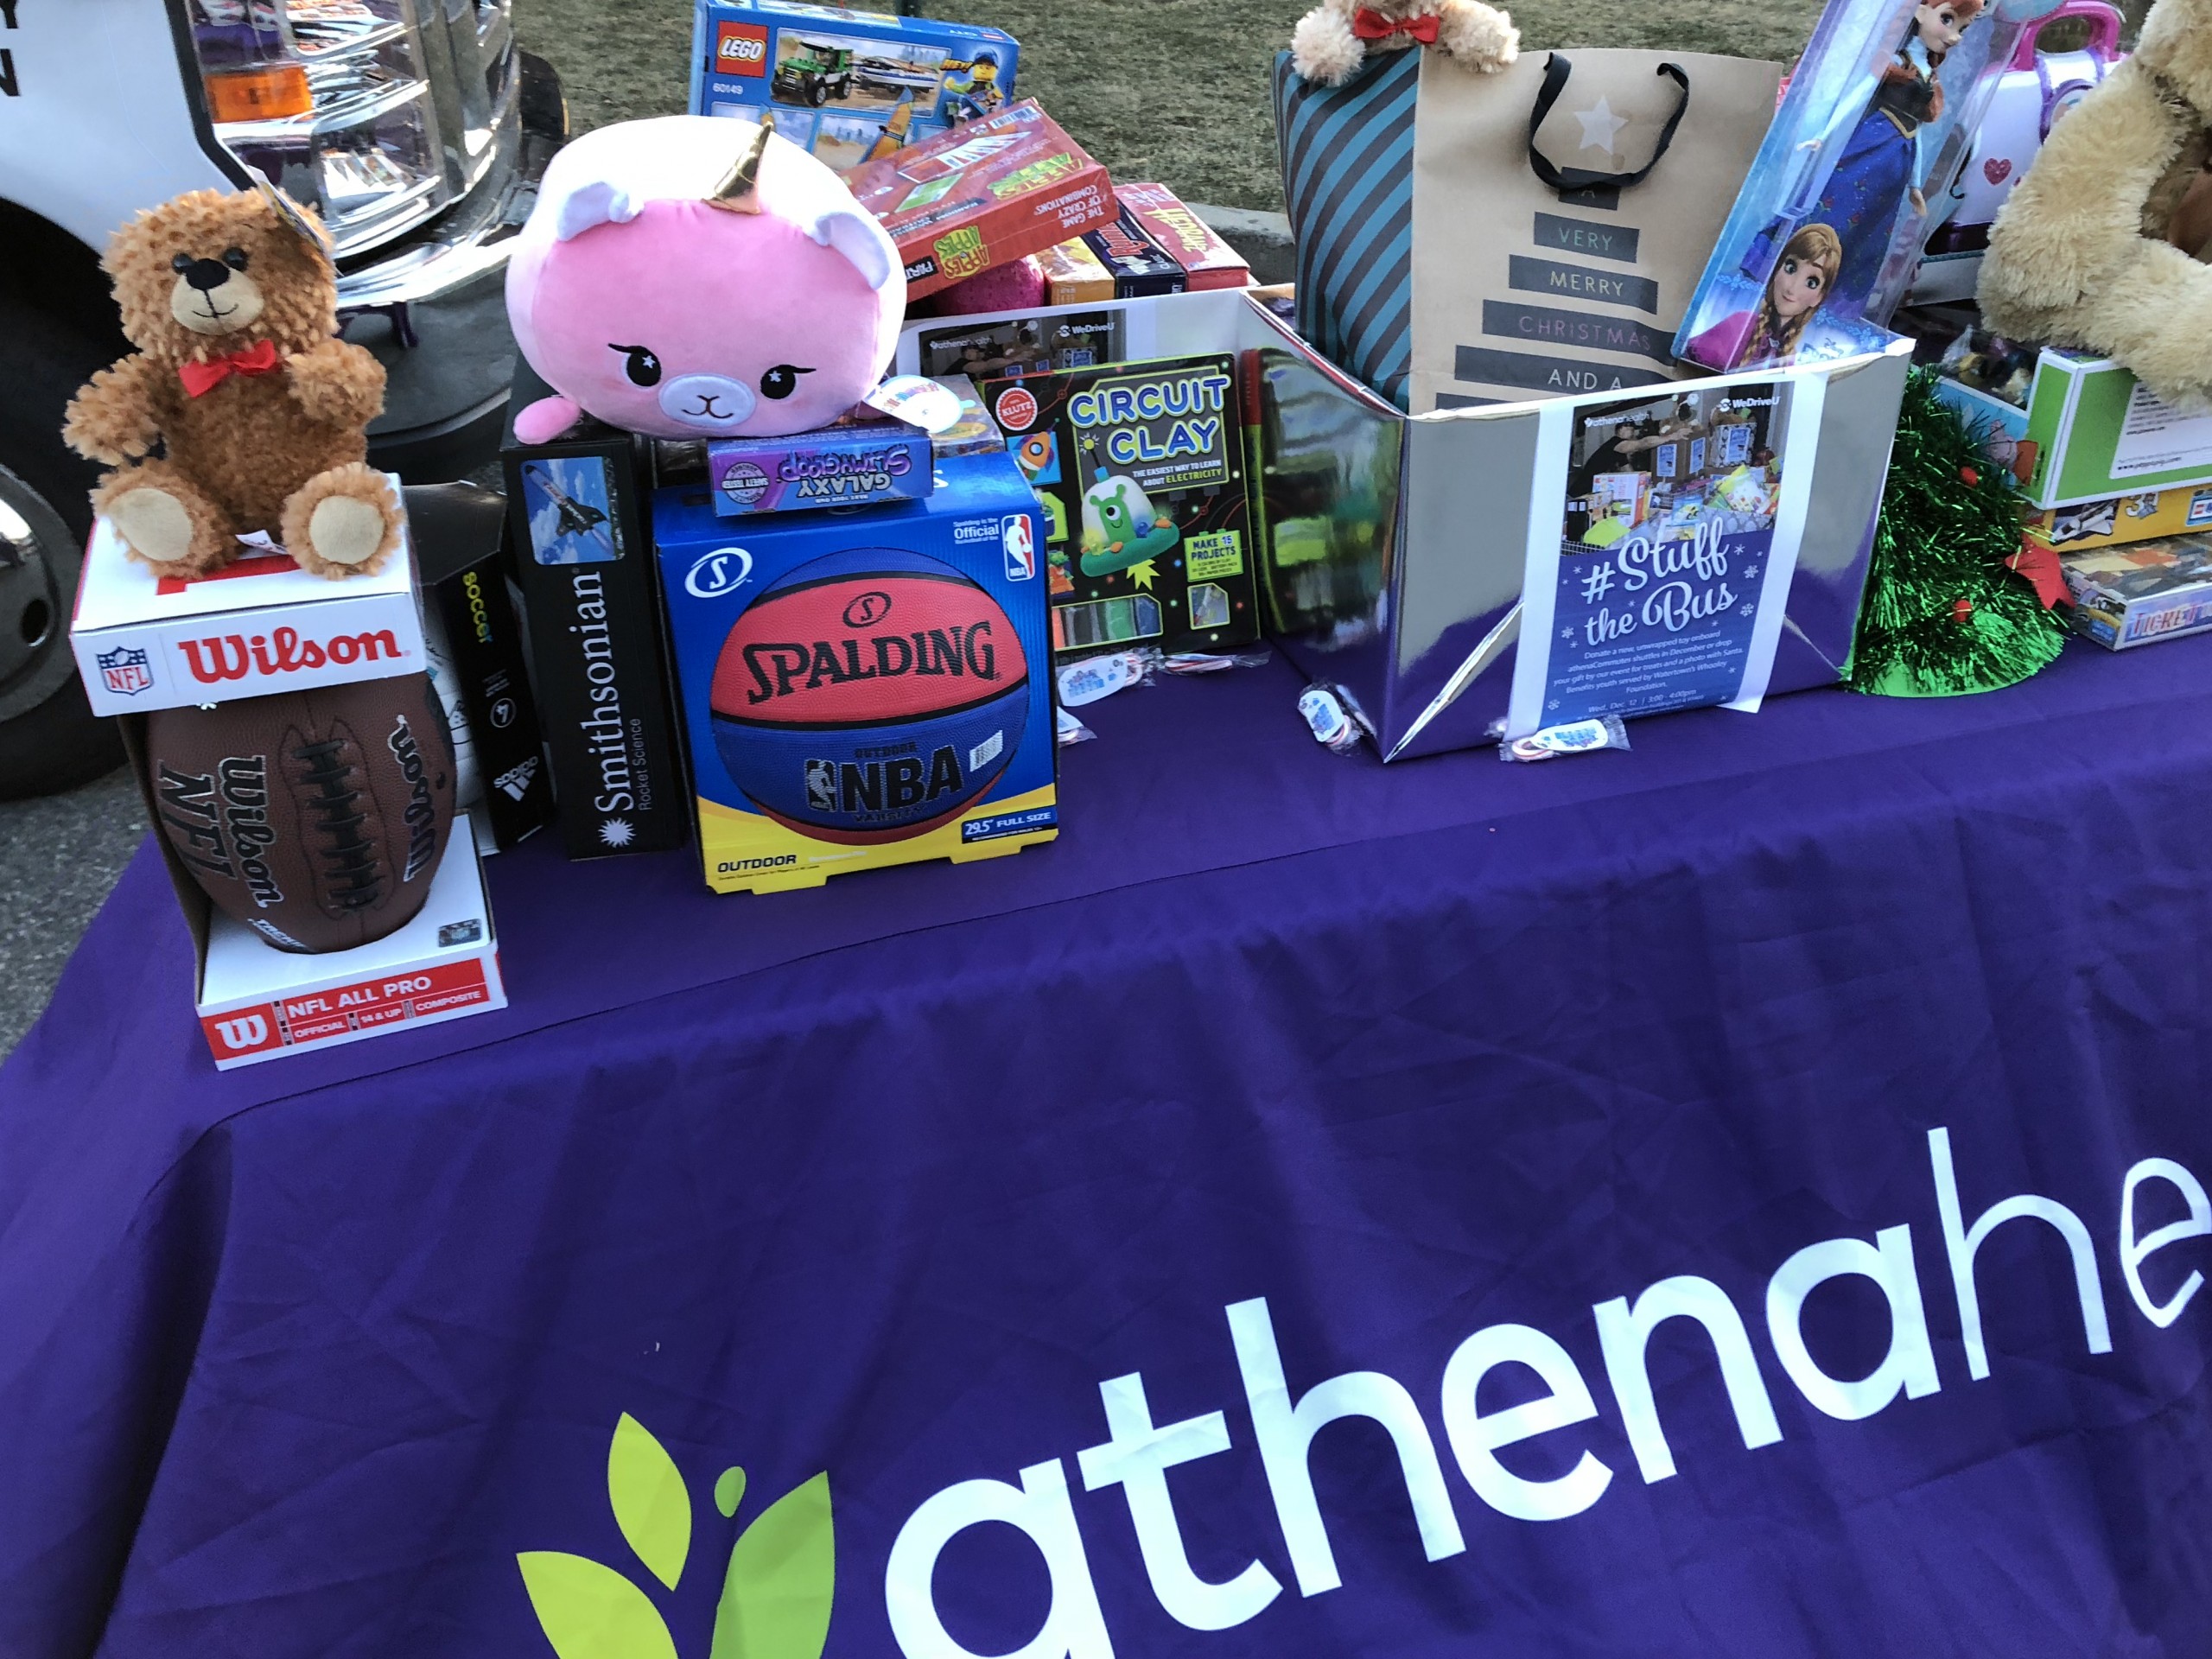 WeDriveU Stuff the Bus with athenahealth Watertown, MA for Whooley Foundation with Watertown Police Department and Fire Department